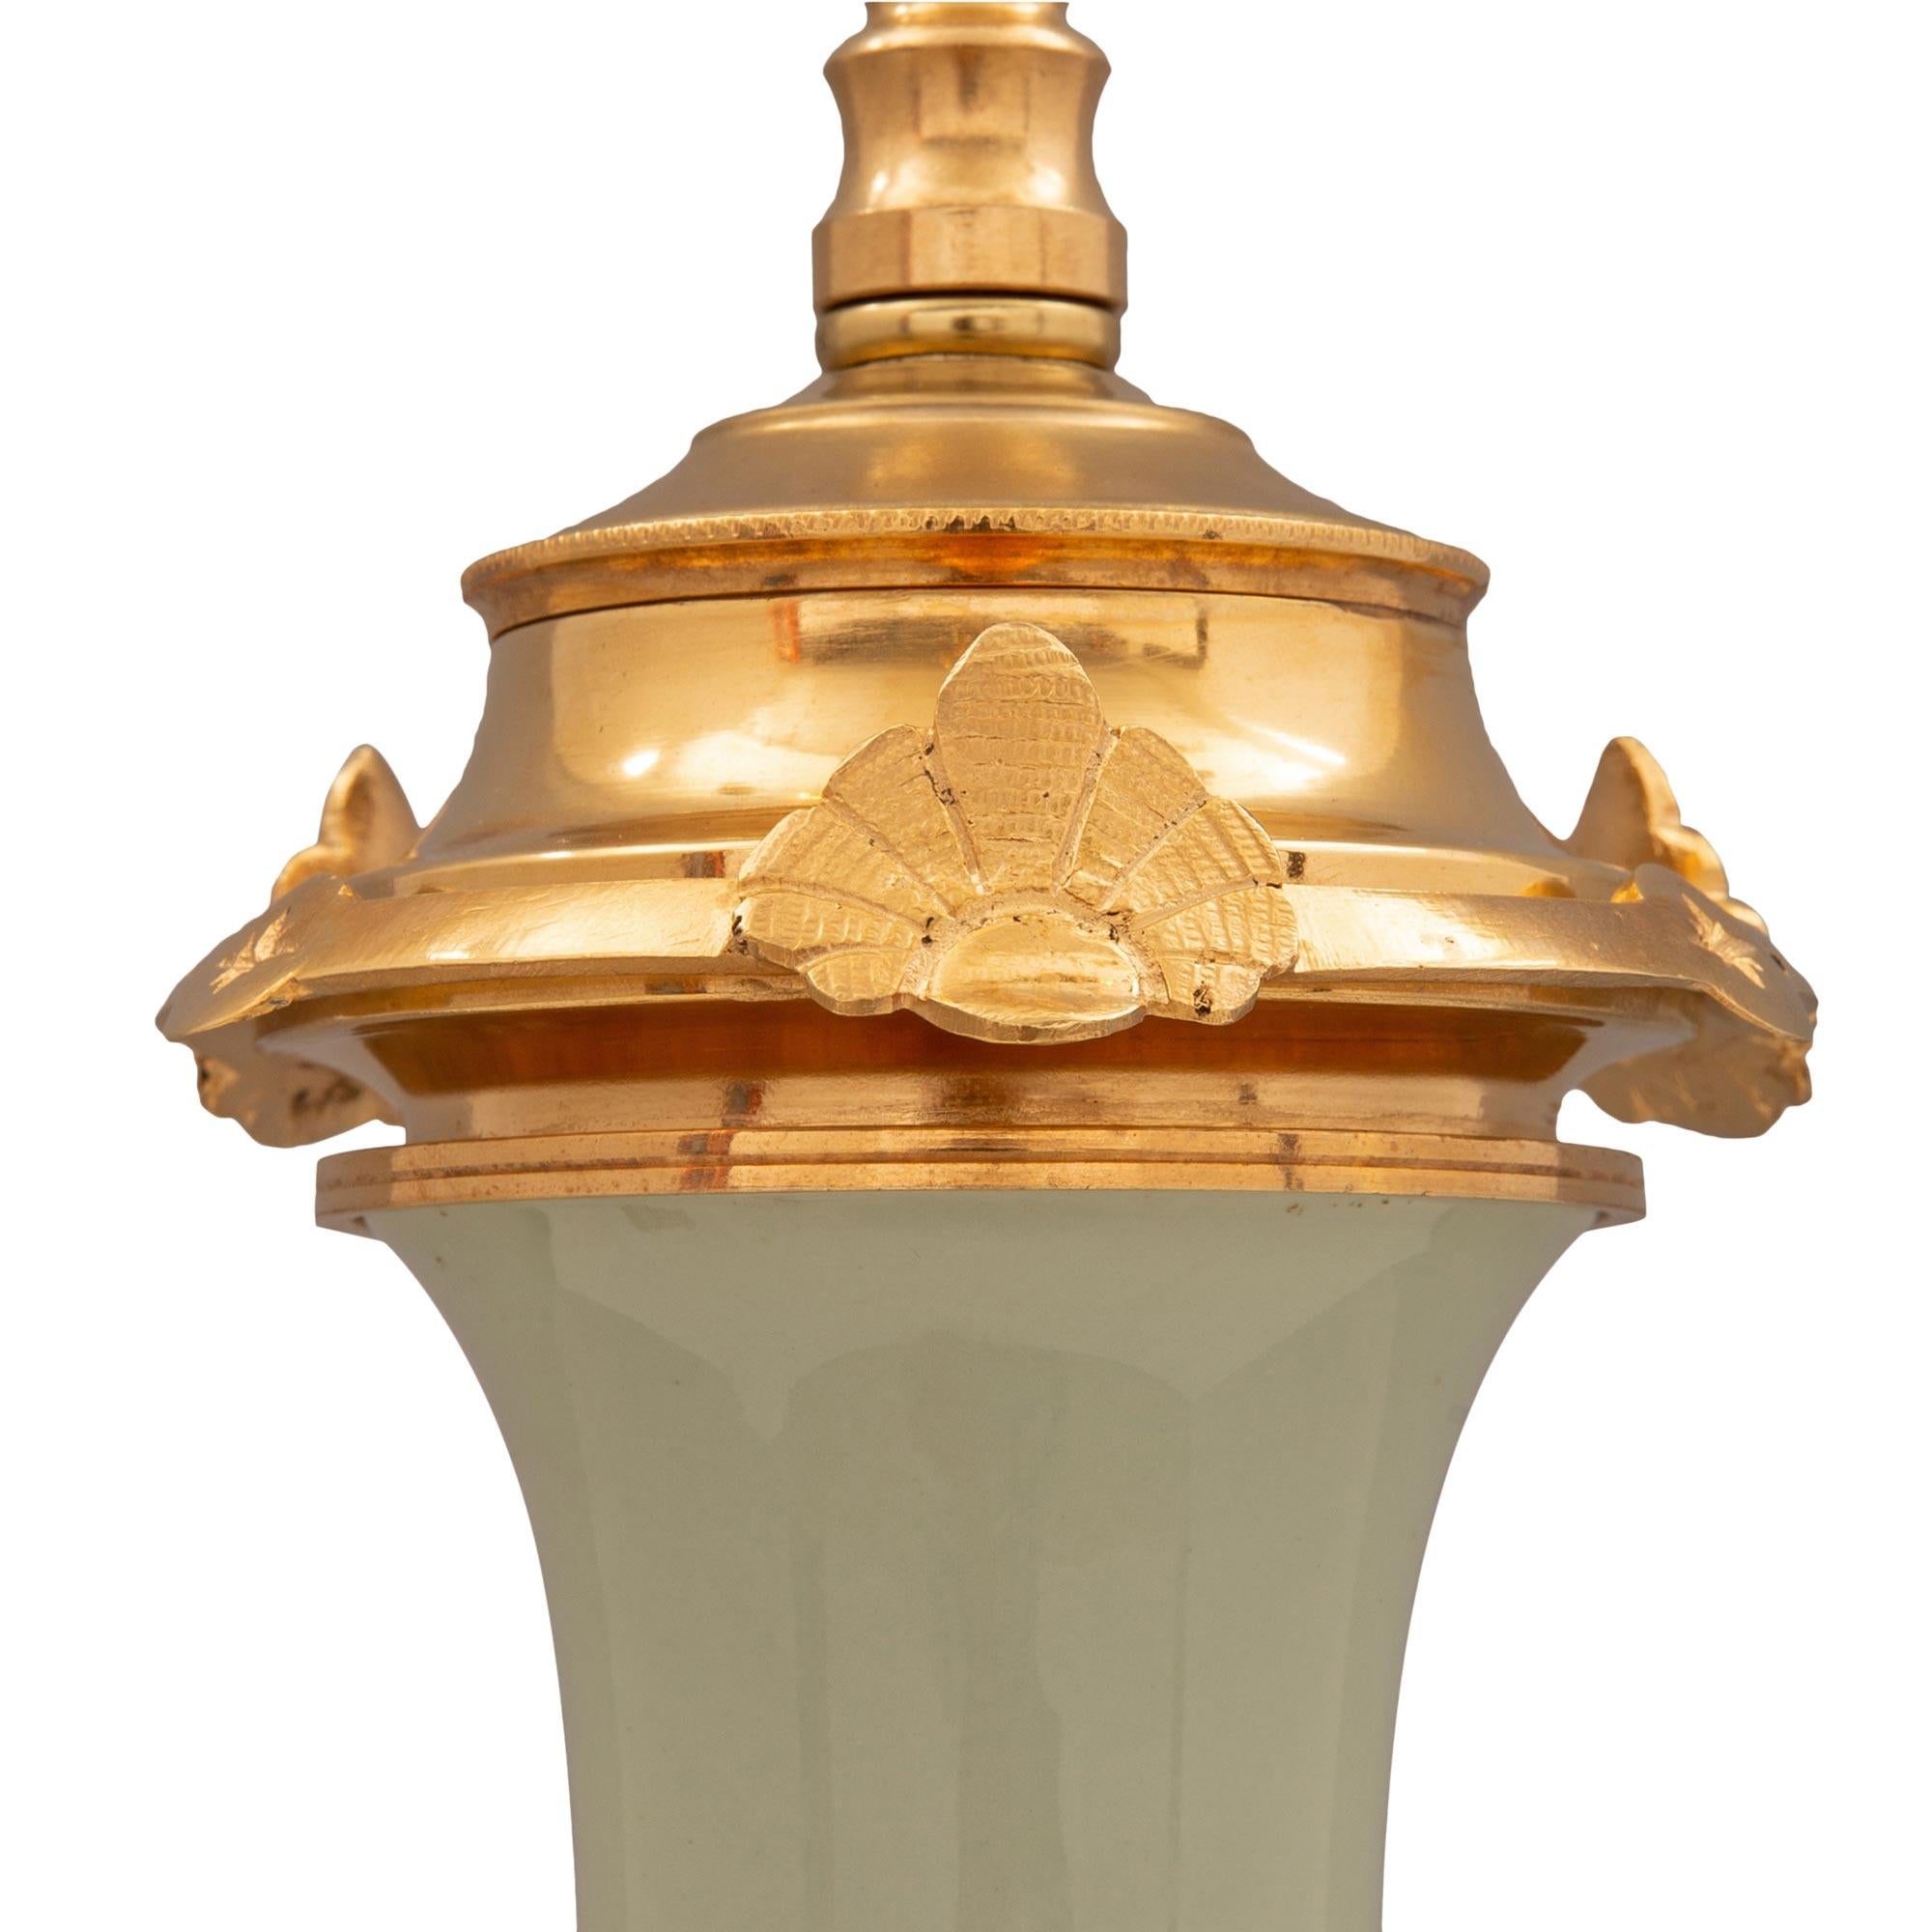 French 19th Century Renaissance St. Porcelain and Ormolu Lamp For Sale 1